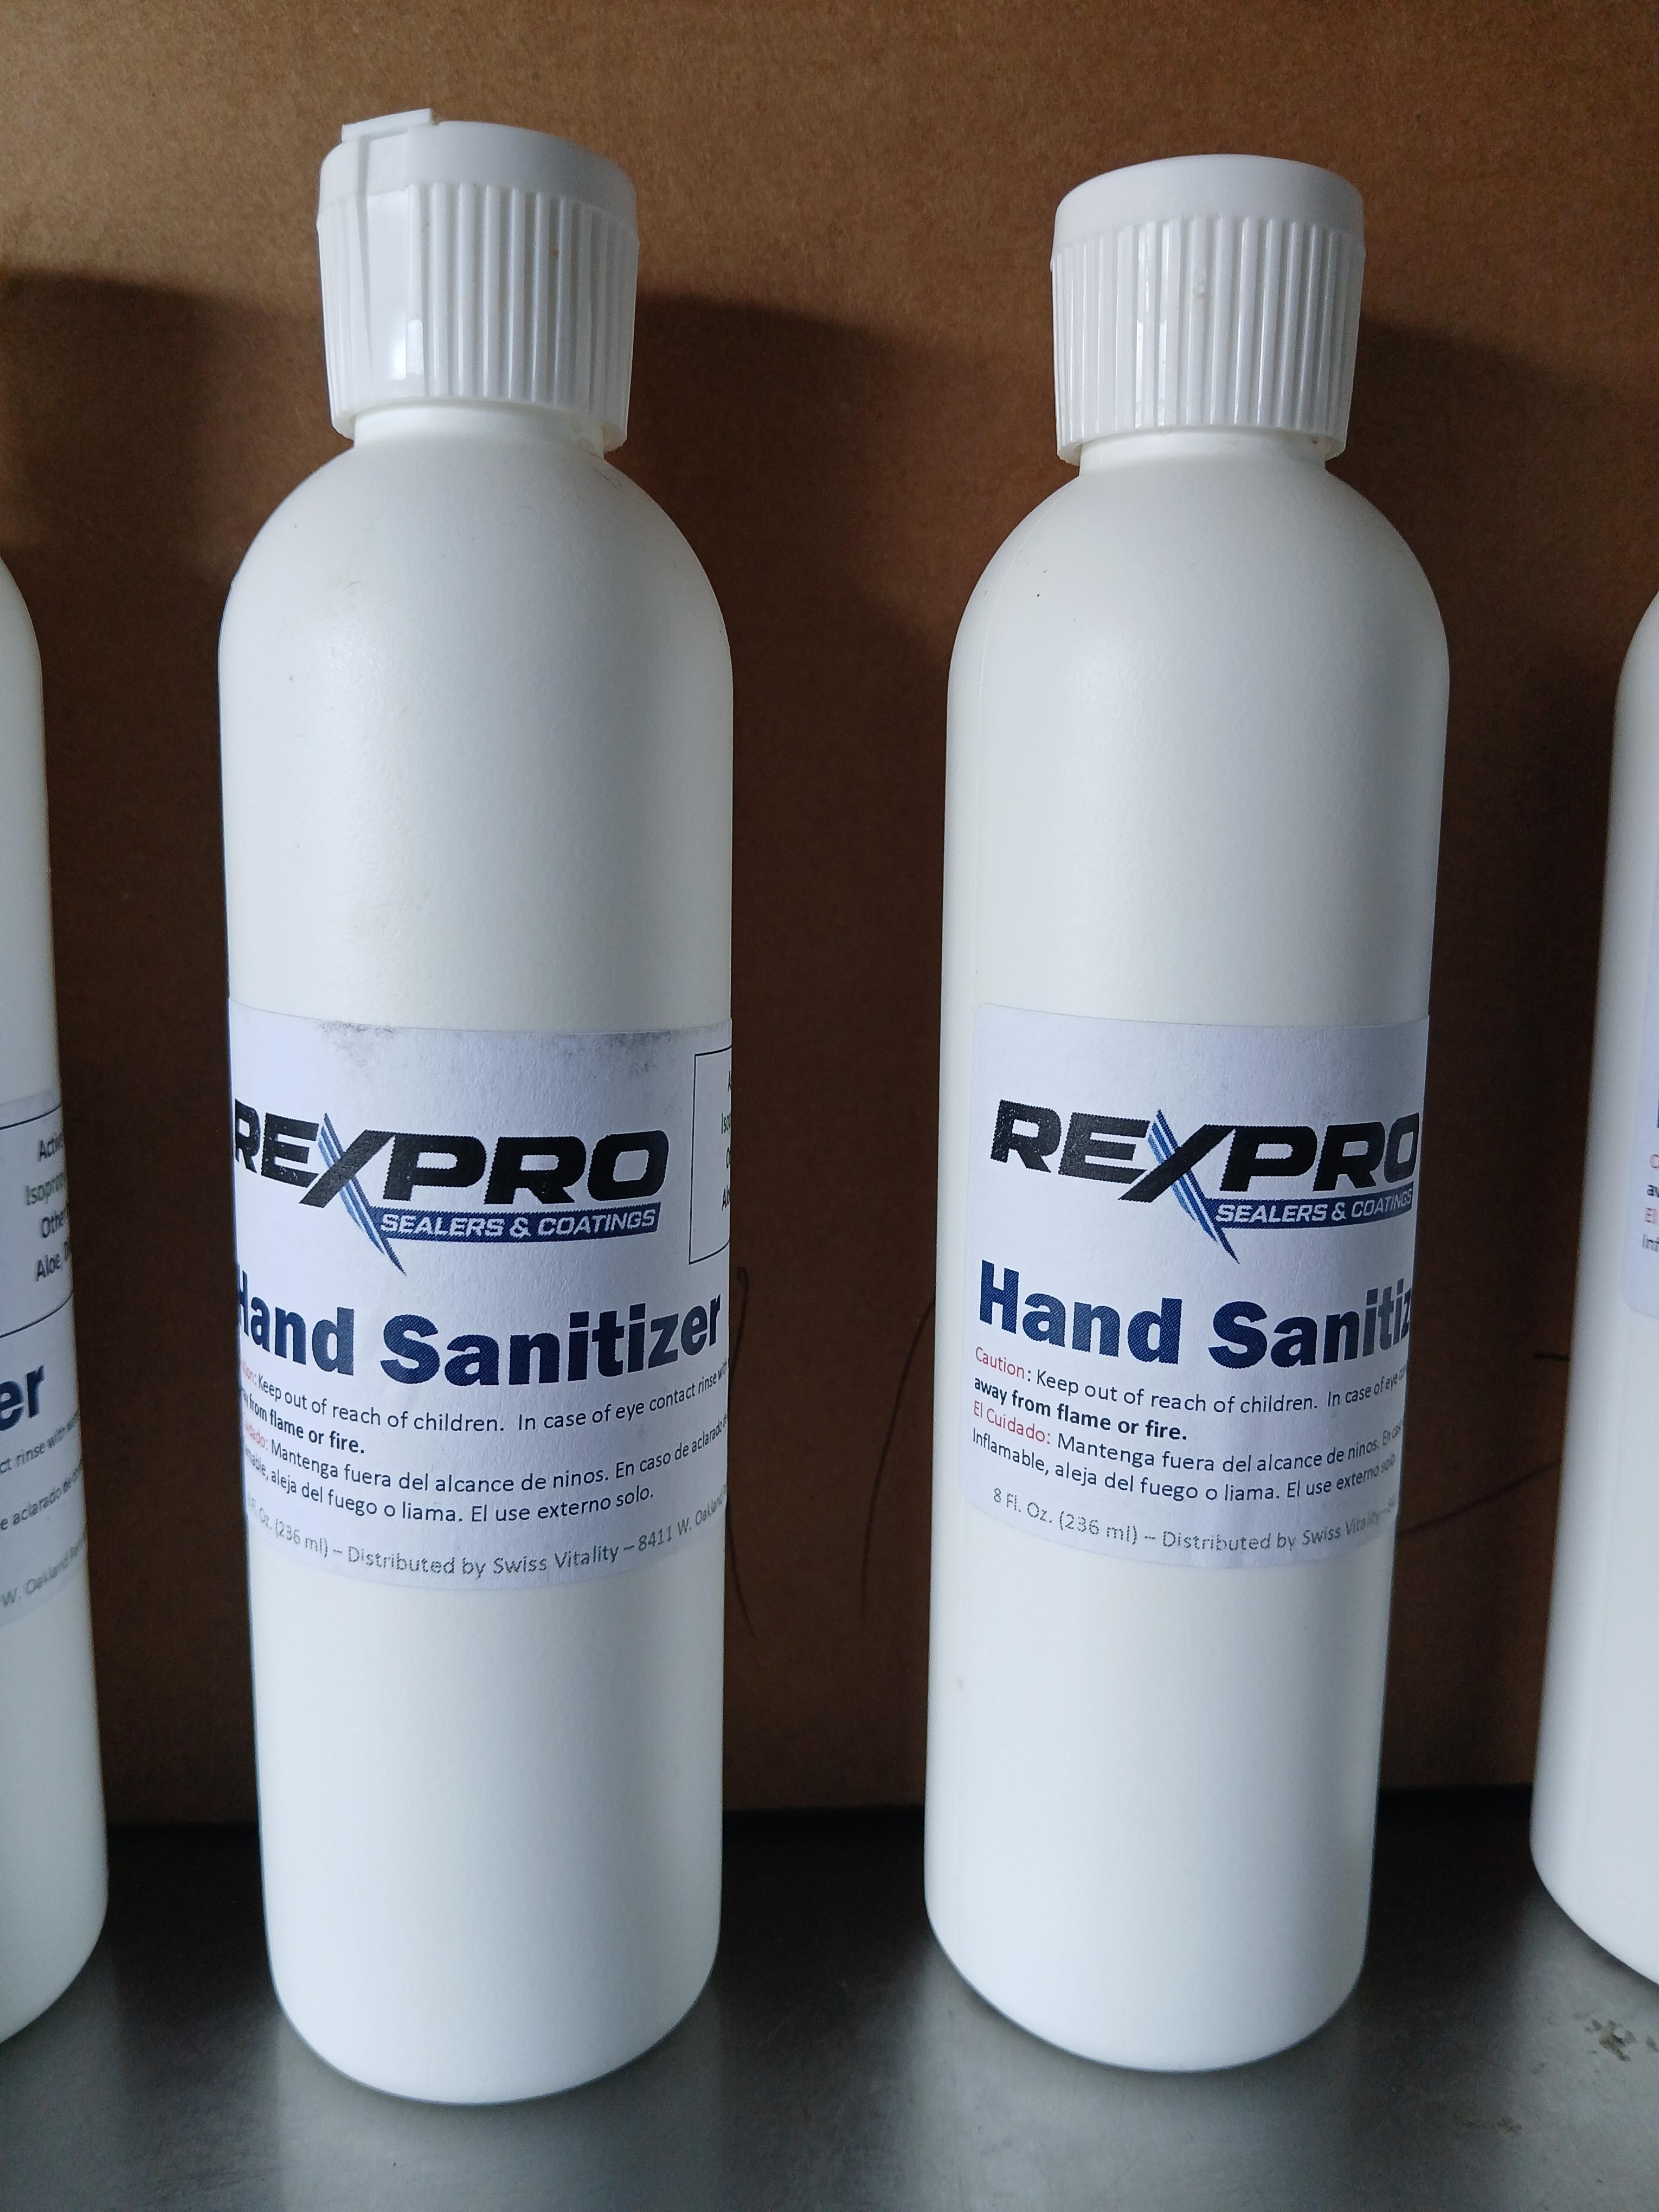 REXPRO Hand Sanitizer / Bottled Hand Sanitizer - 65% Alcohol Also, Icludes Aloe & Distilled Water -